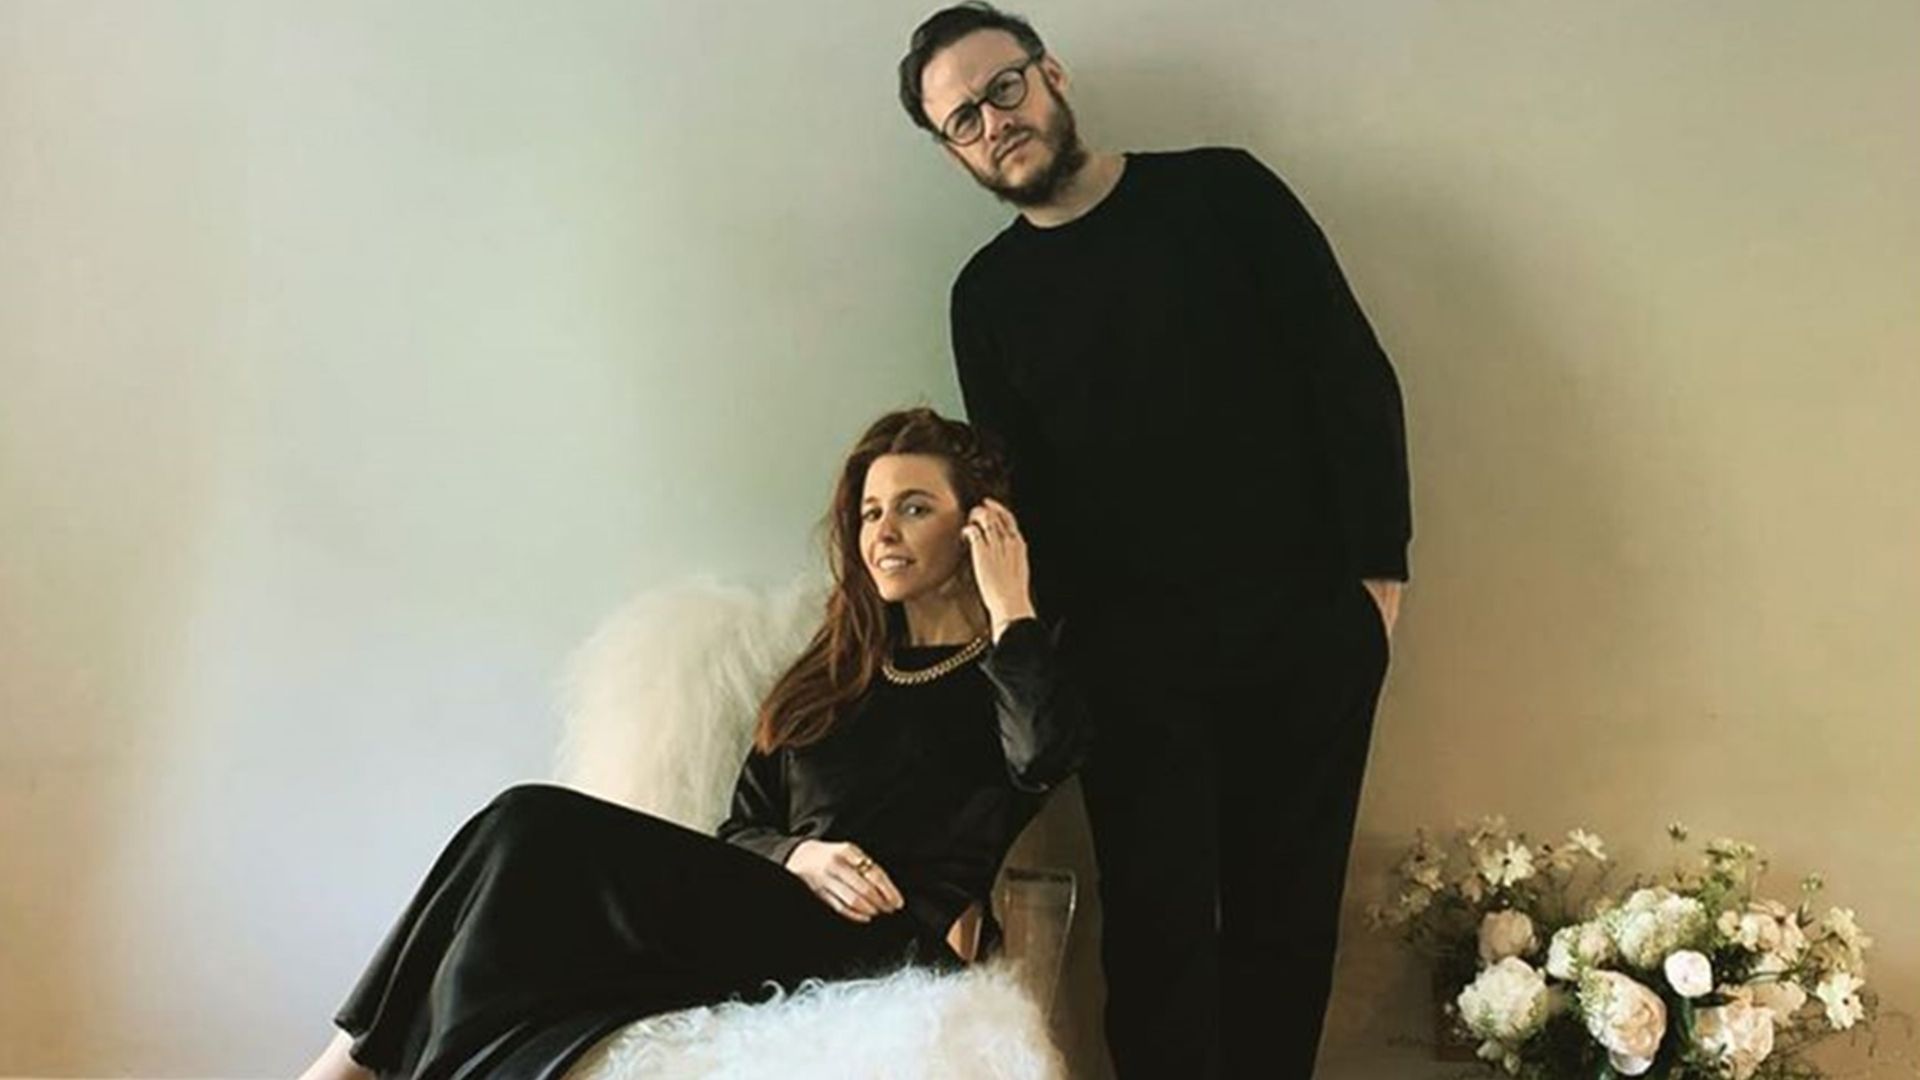 stacey dooley kevin clifton